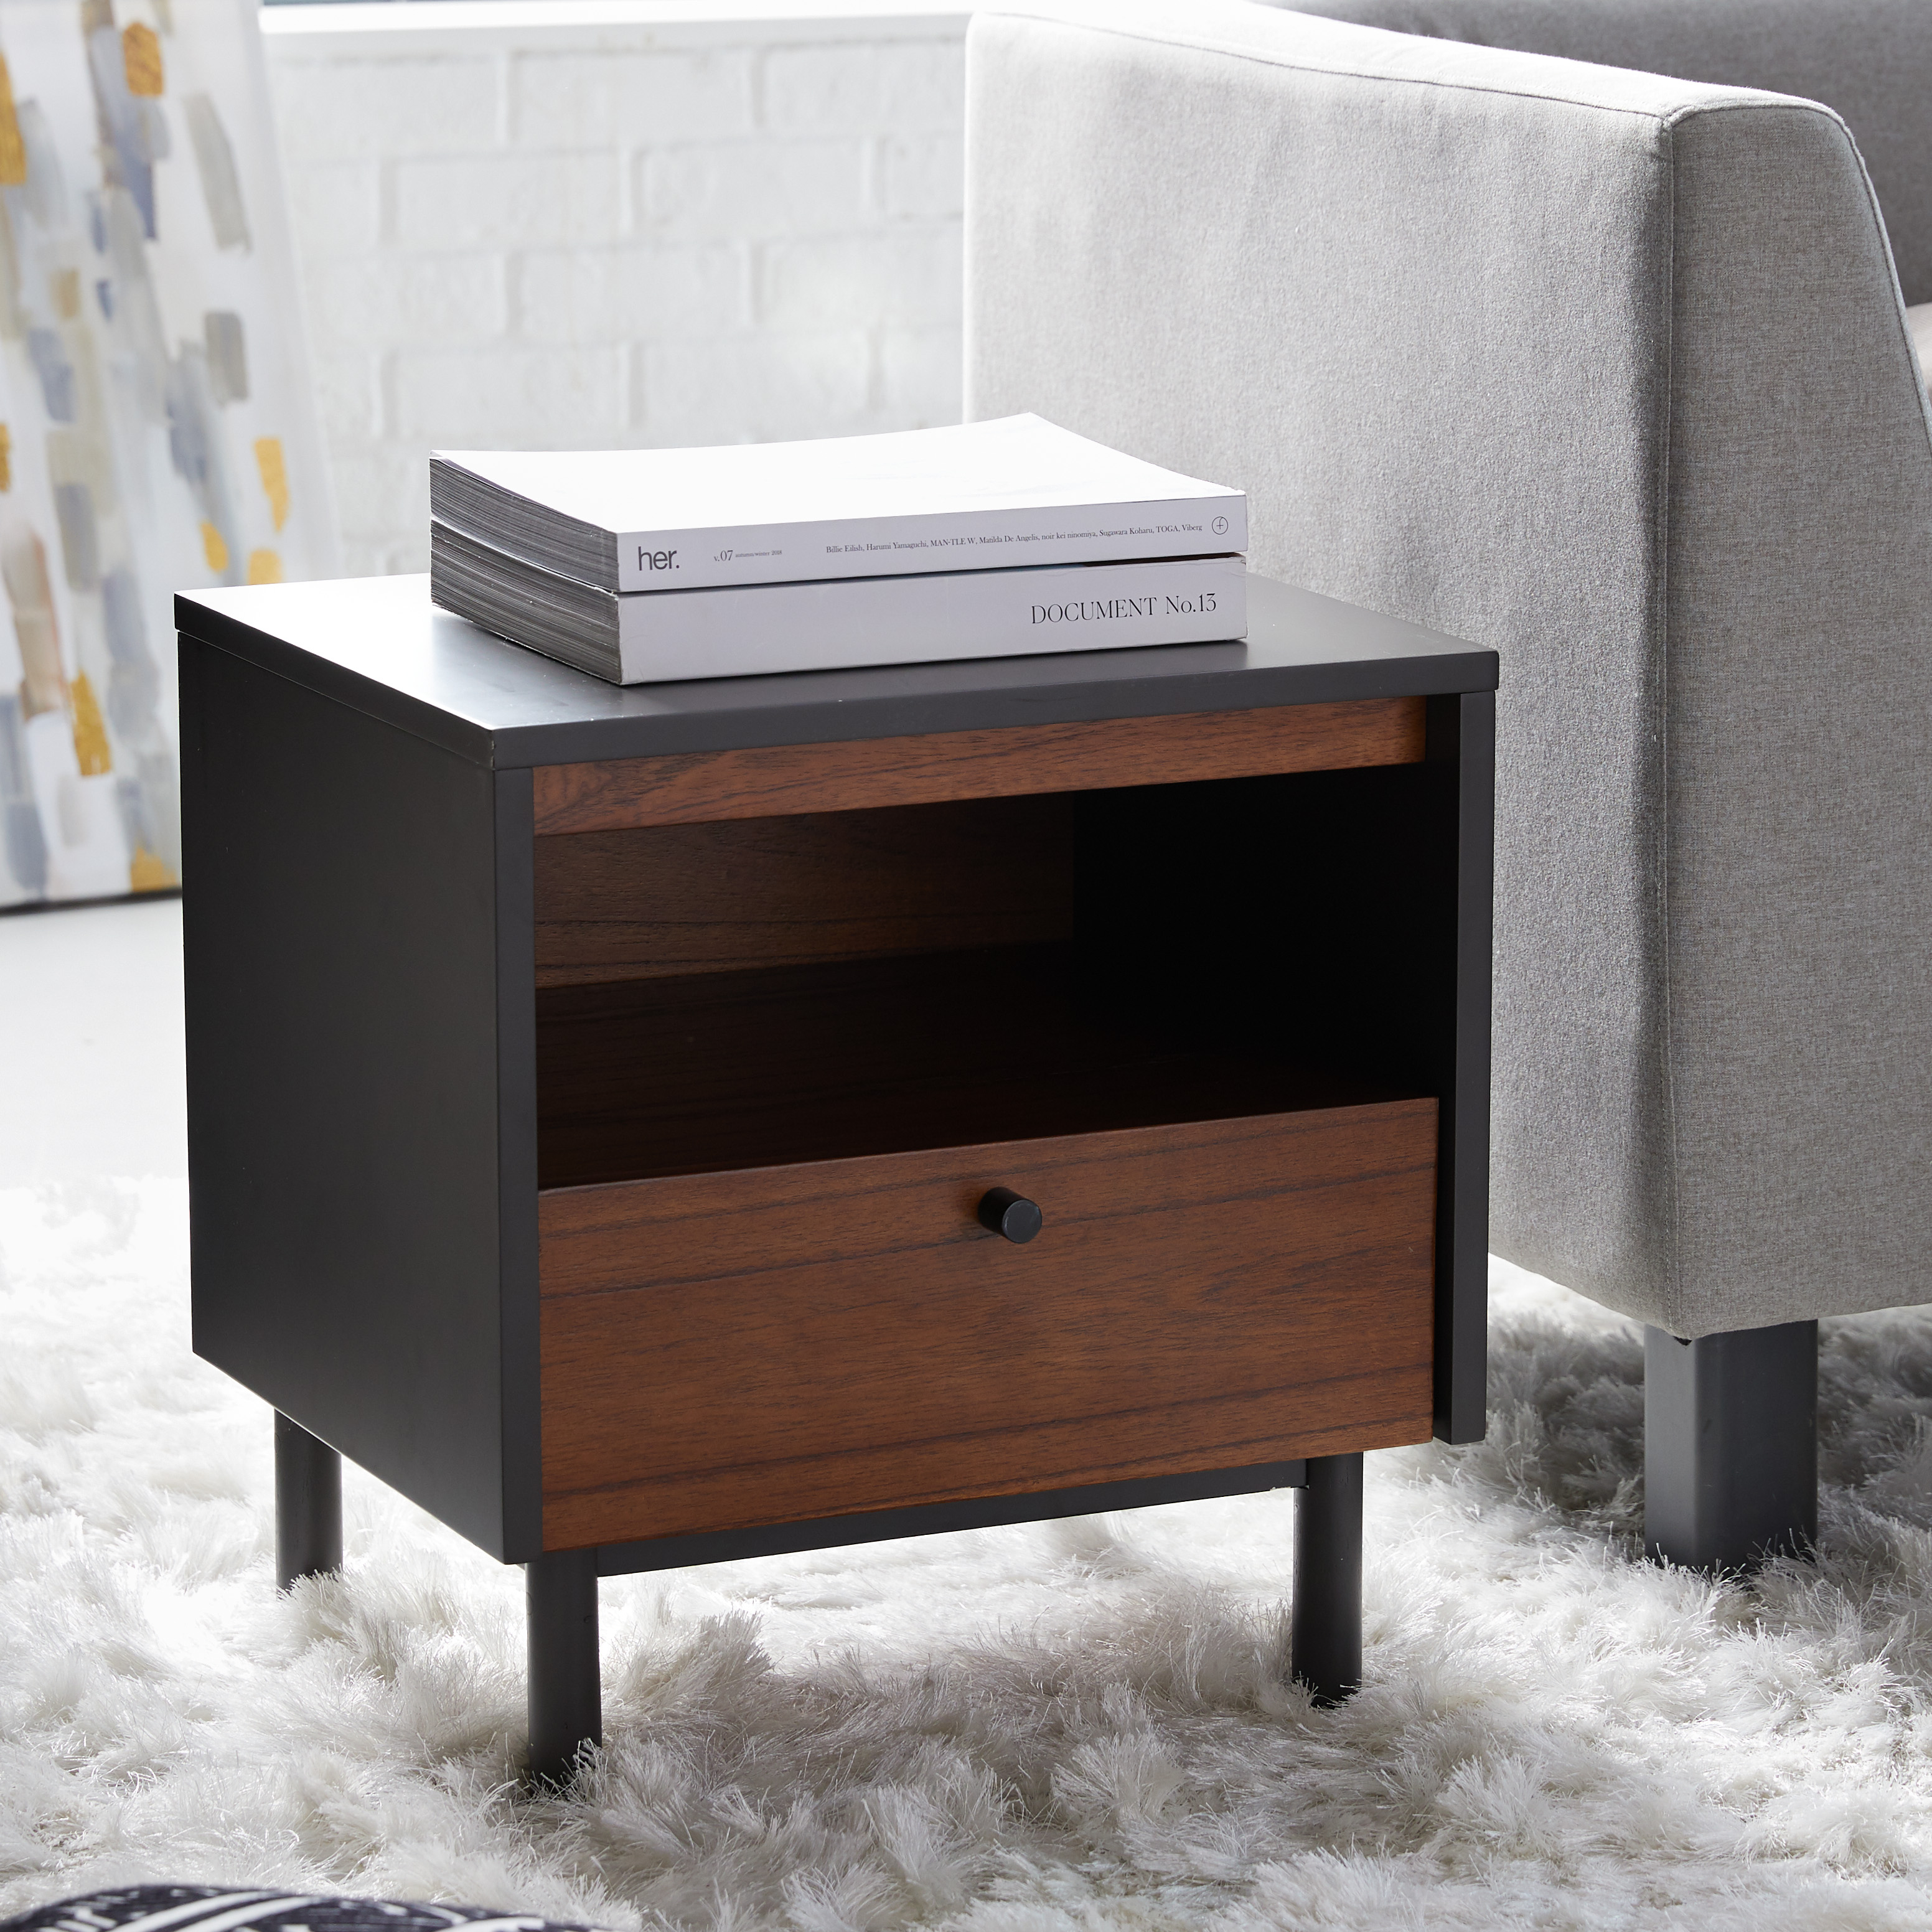 MoDRN Industrial Finna Side Table - image 5 of 14